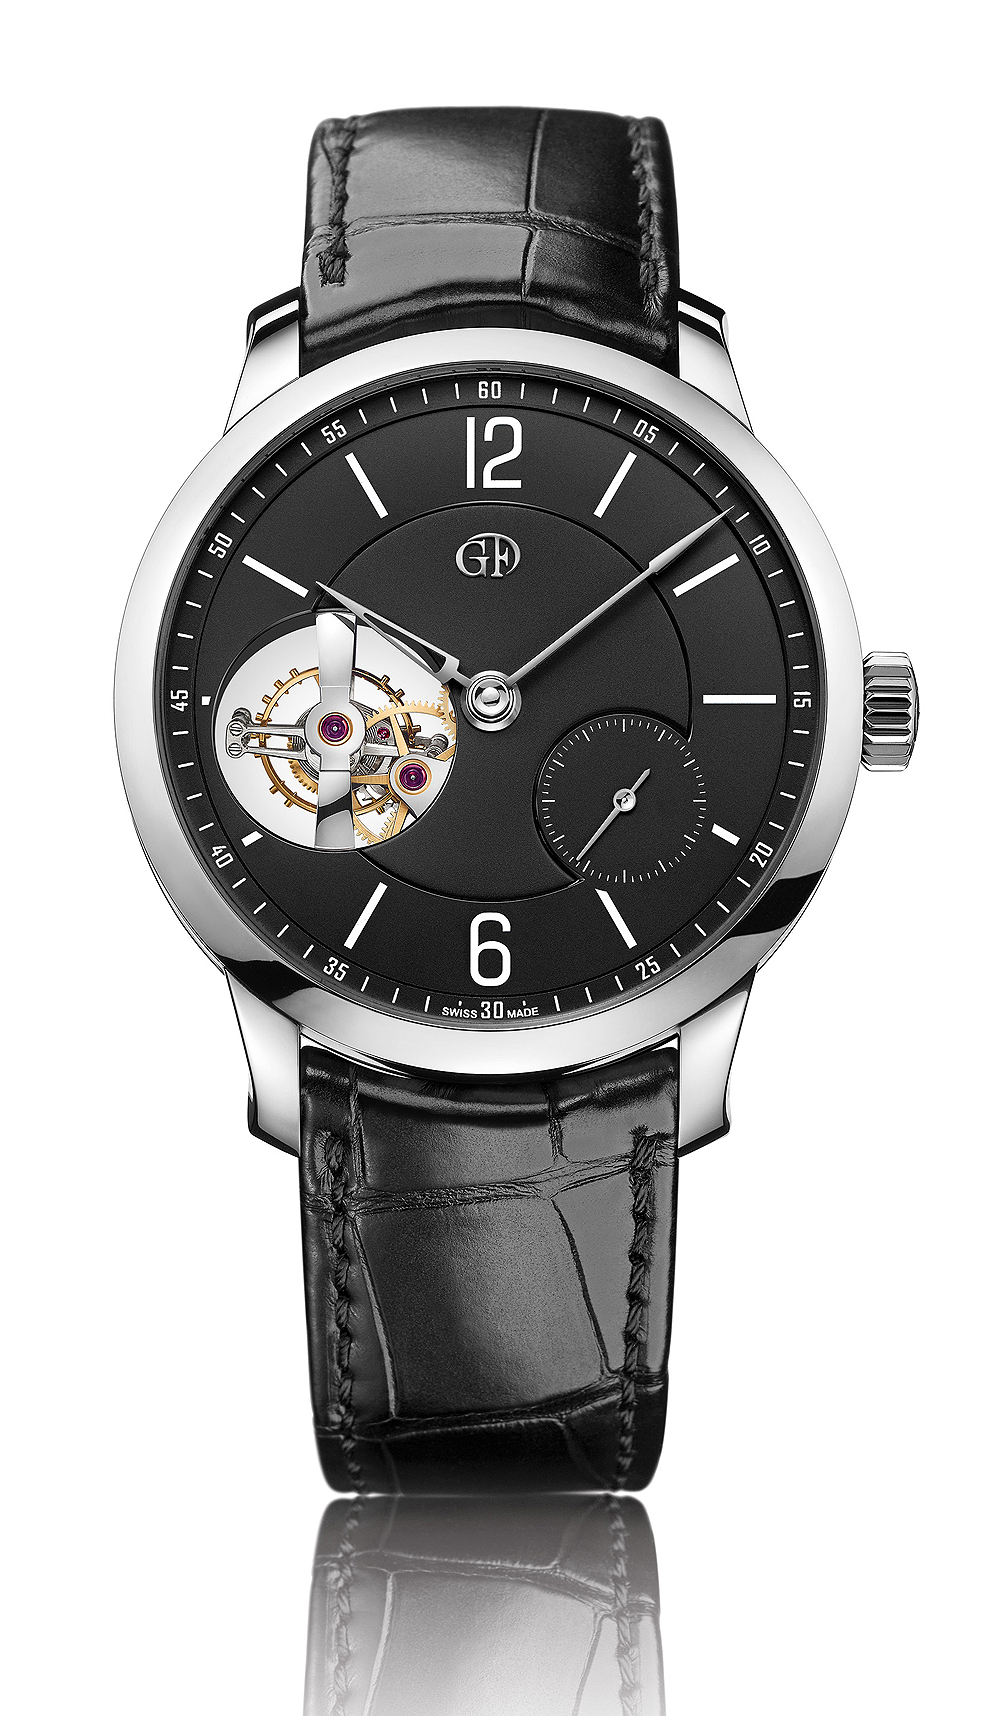 Wider Vision: Greubel Forsey Introduces Platinum Cases, New Dial Colors to Tourbillon 24 Secondes Vision